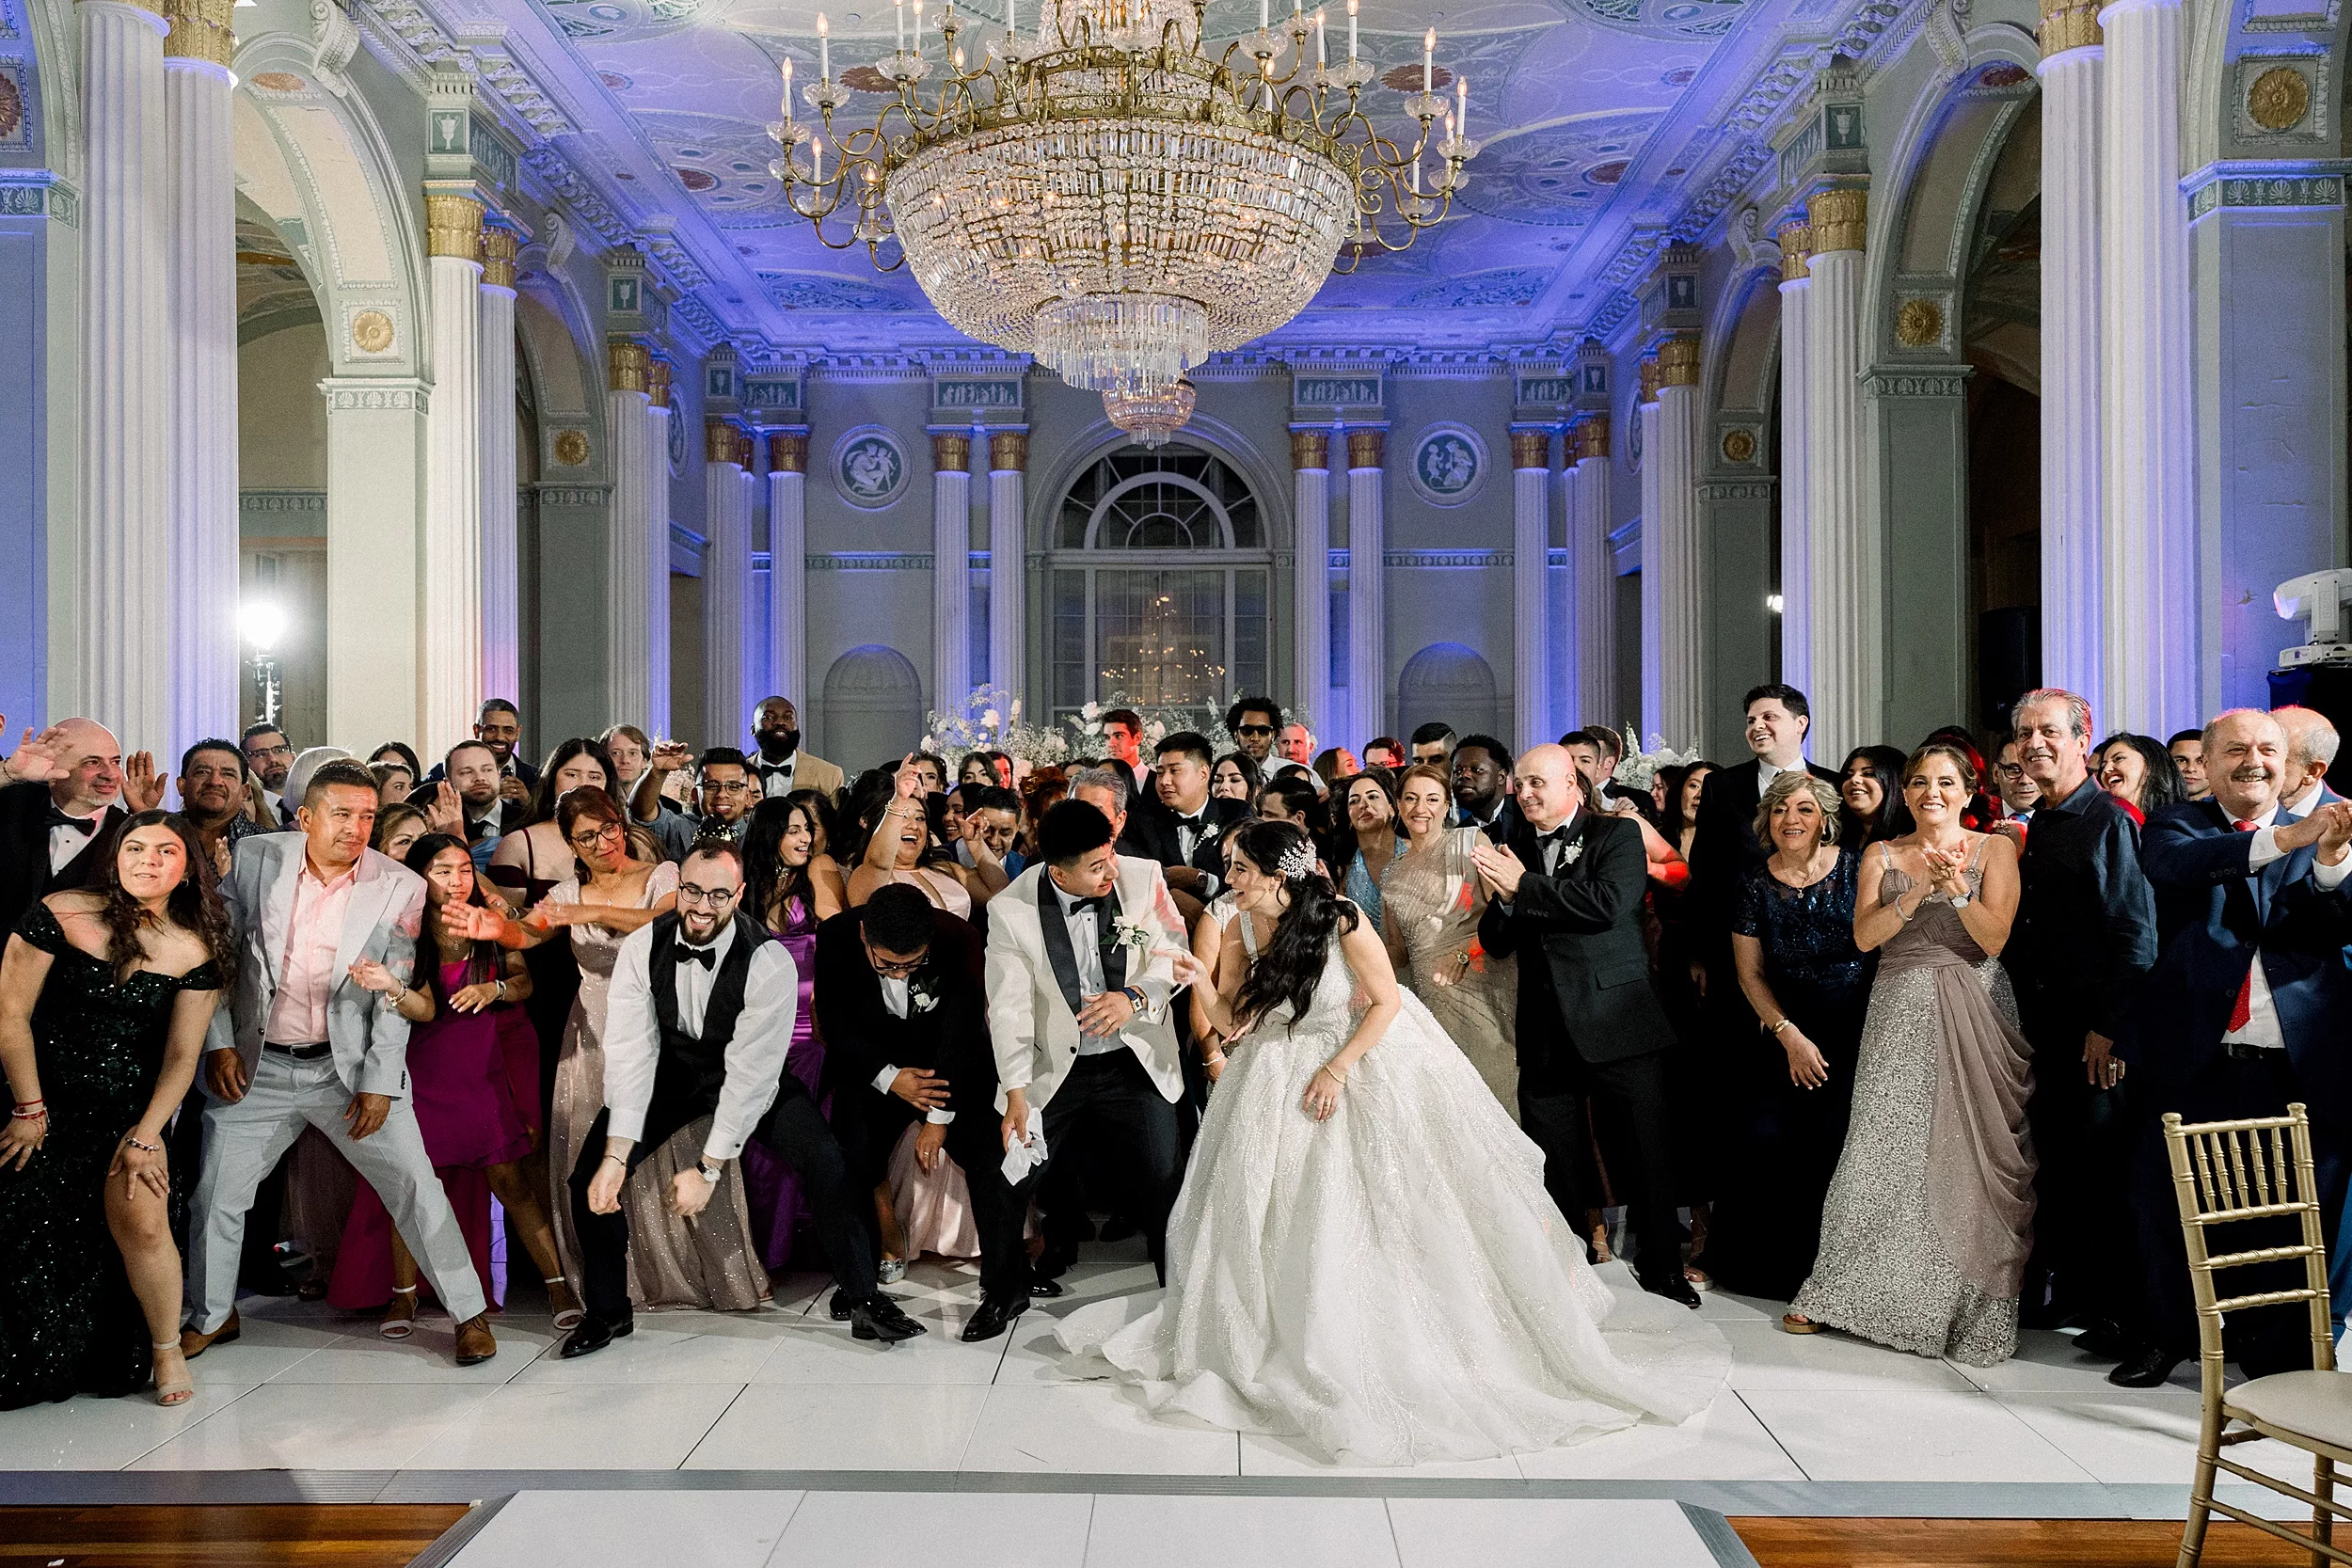 The guests of a wedding dance and celebrate behind the bride and groom under a large crystal chandelier at a Biltmore Ballrooms Wedding